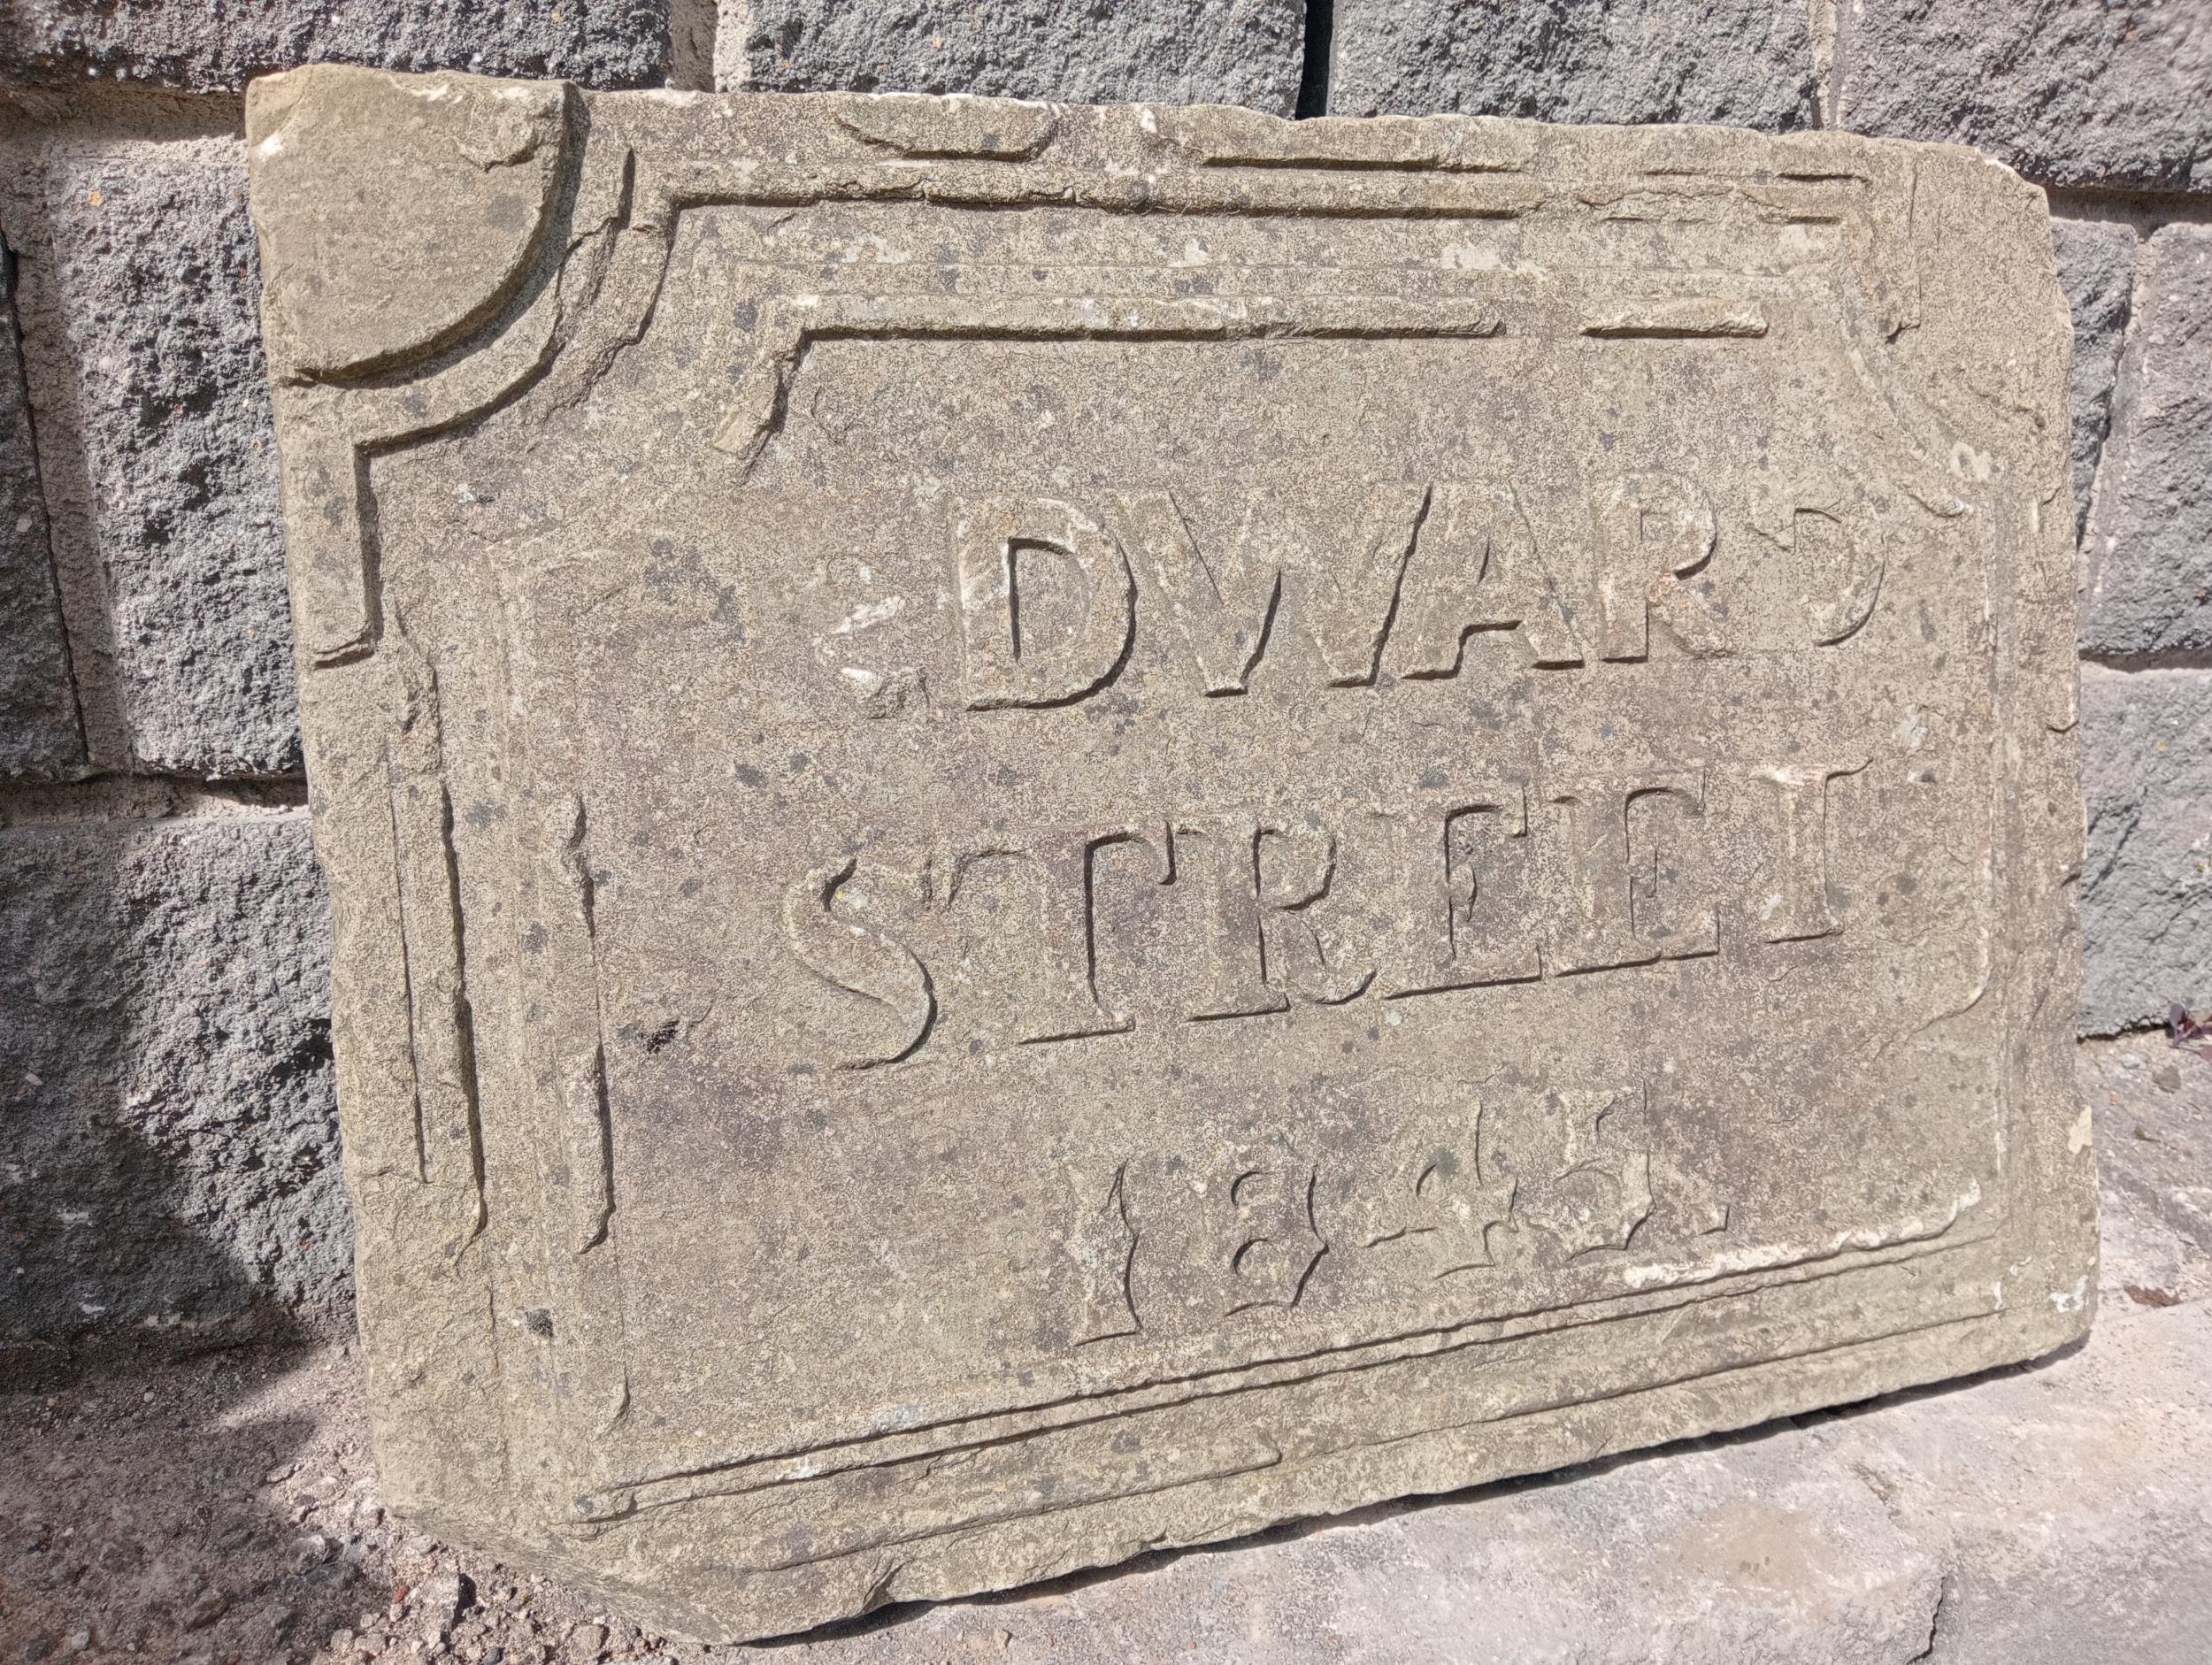 Stone carved Edward street 1845 sign{H 50cm x W 68cm x D 9cm }. (NOT AVAILABLE TO VIEW IN PERSON) - Image 2 of 4